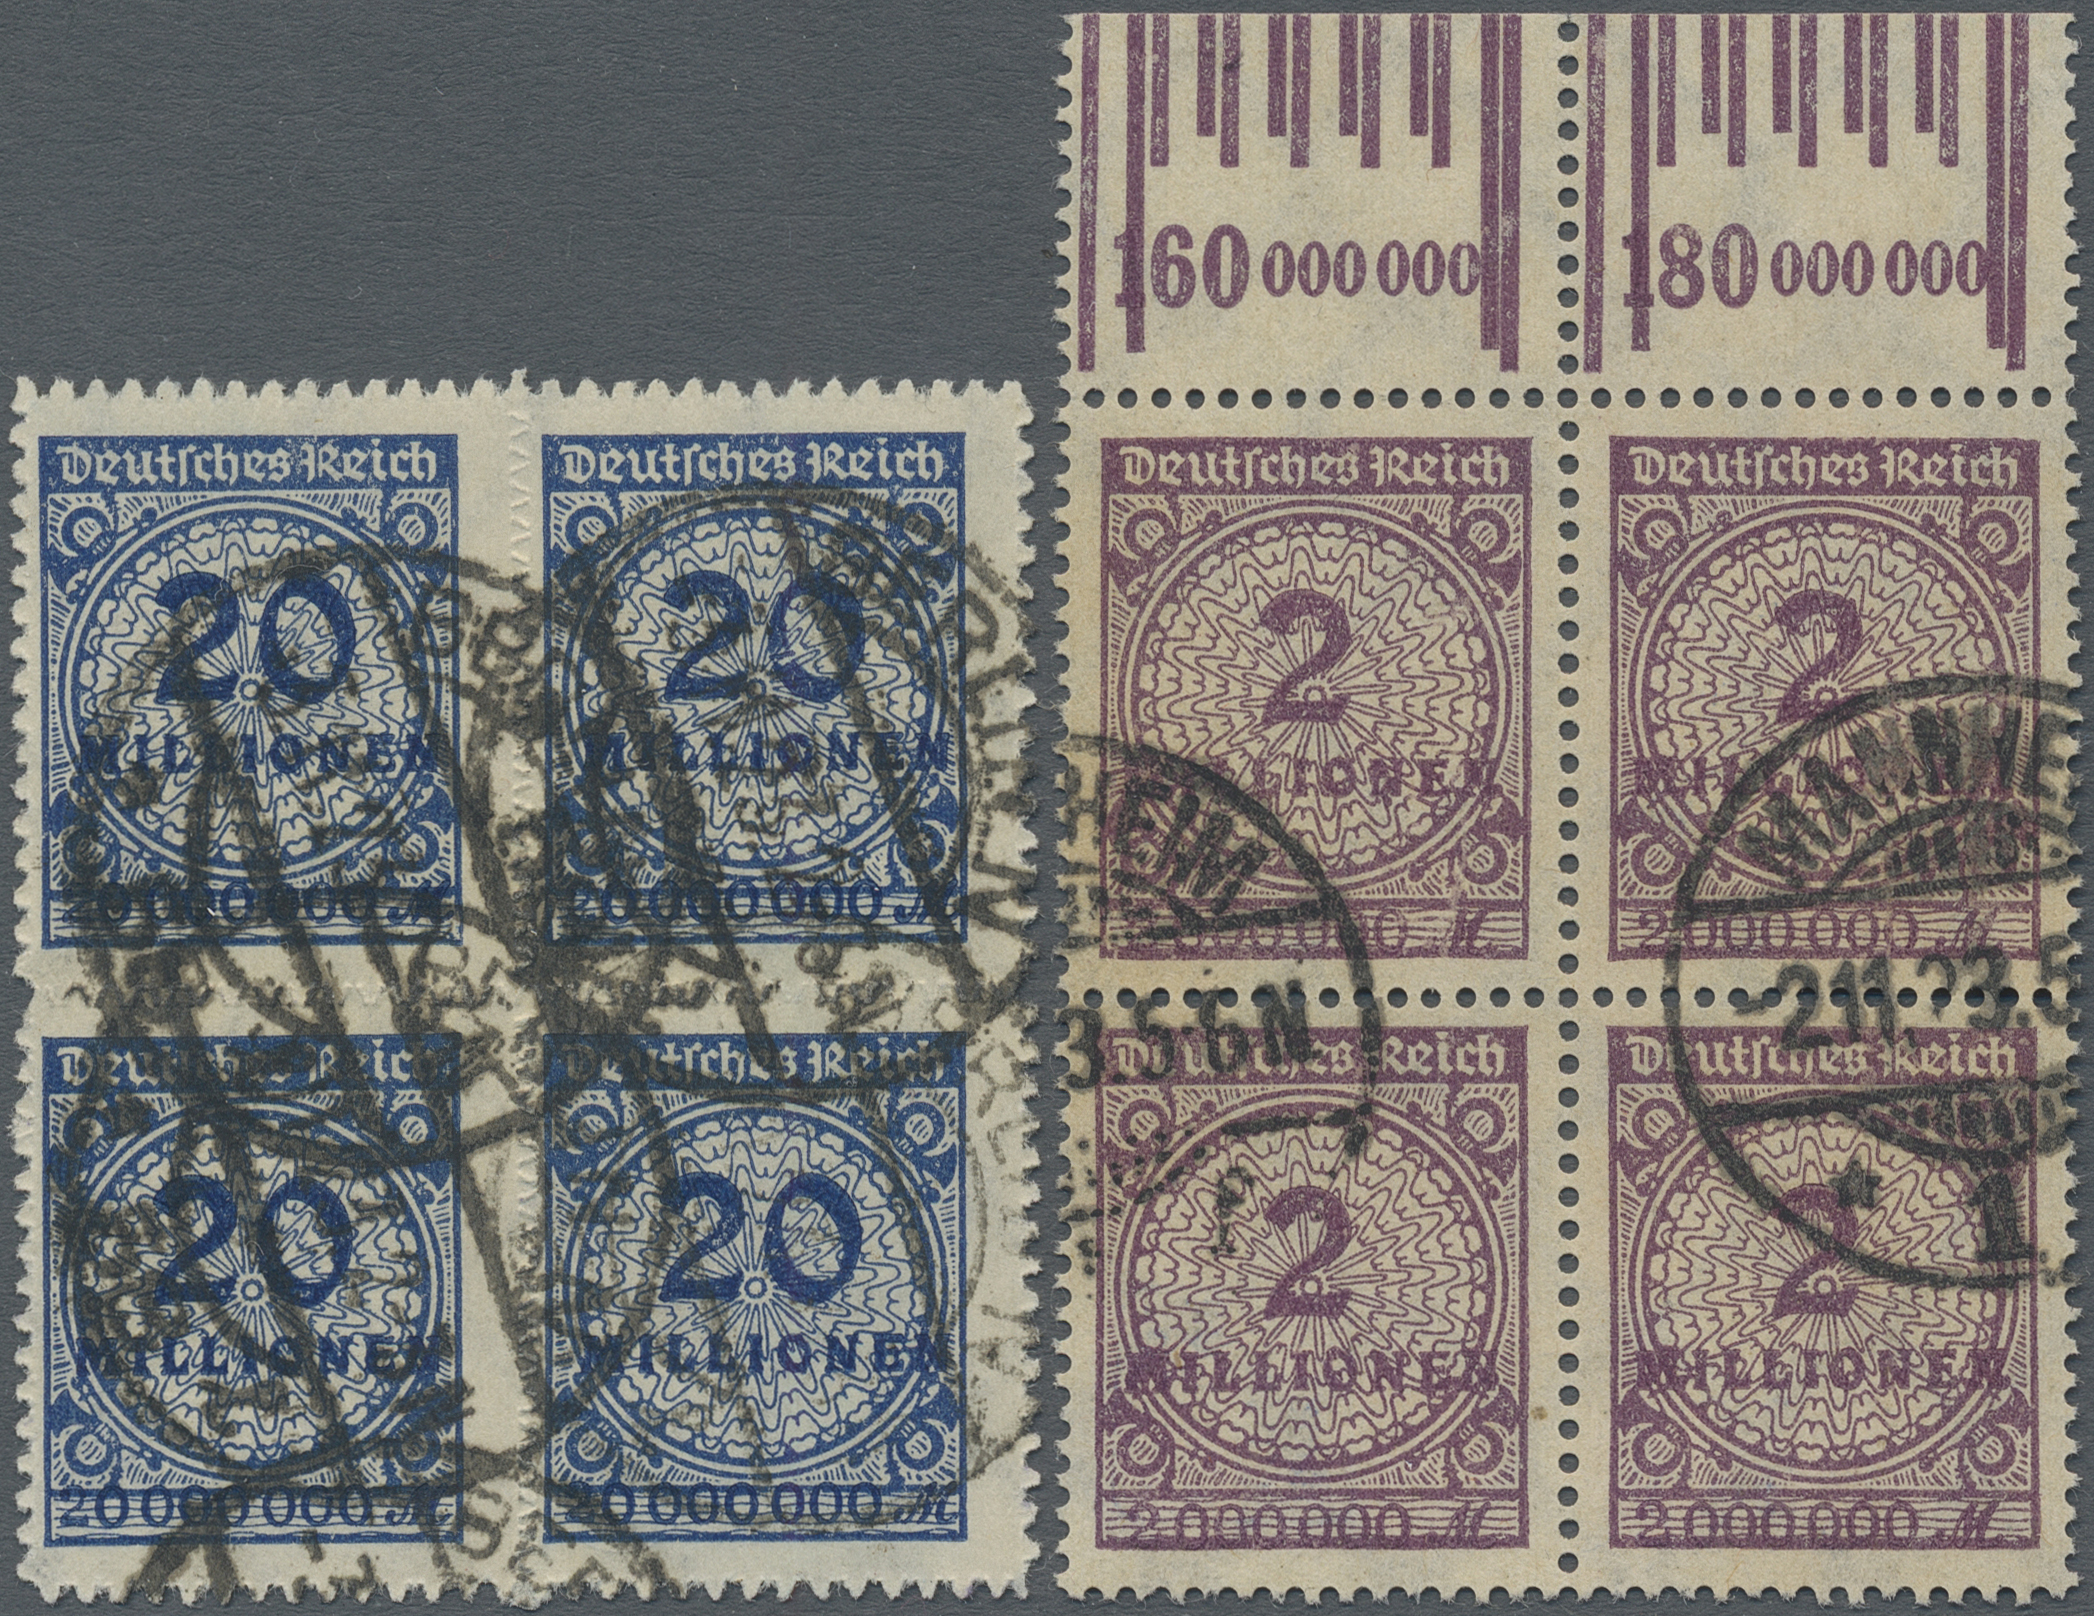 Lot 36673 - Deutsches Reich - Inflation  -  Auktionshaus Christoph Gärtner GmbH & Co. KG Sale #44 Collections Germany